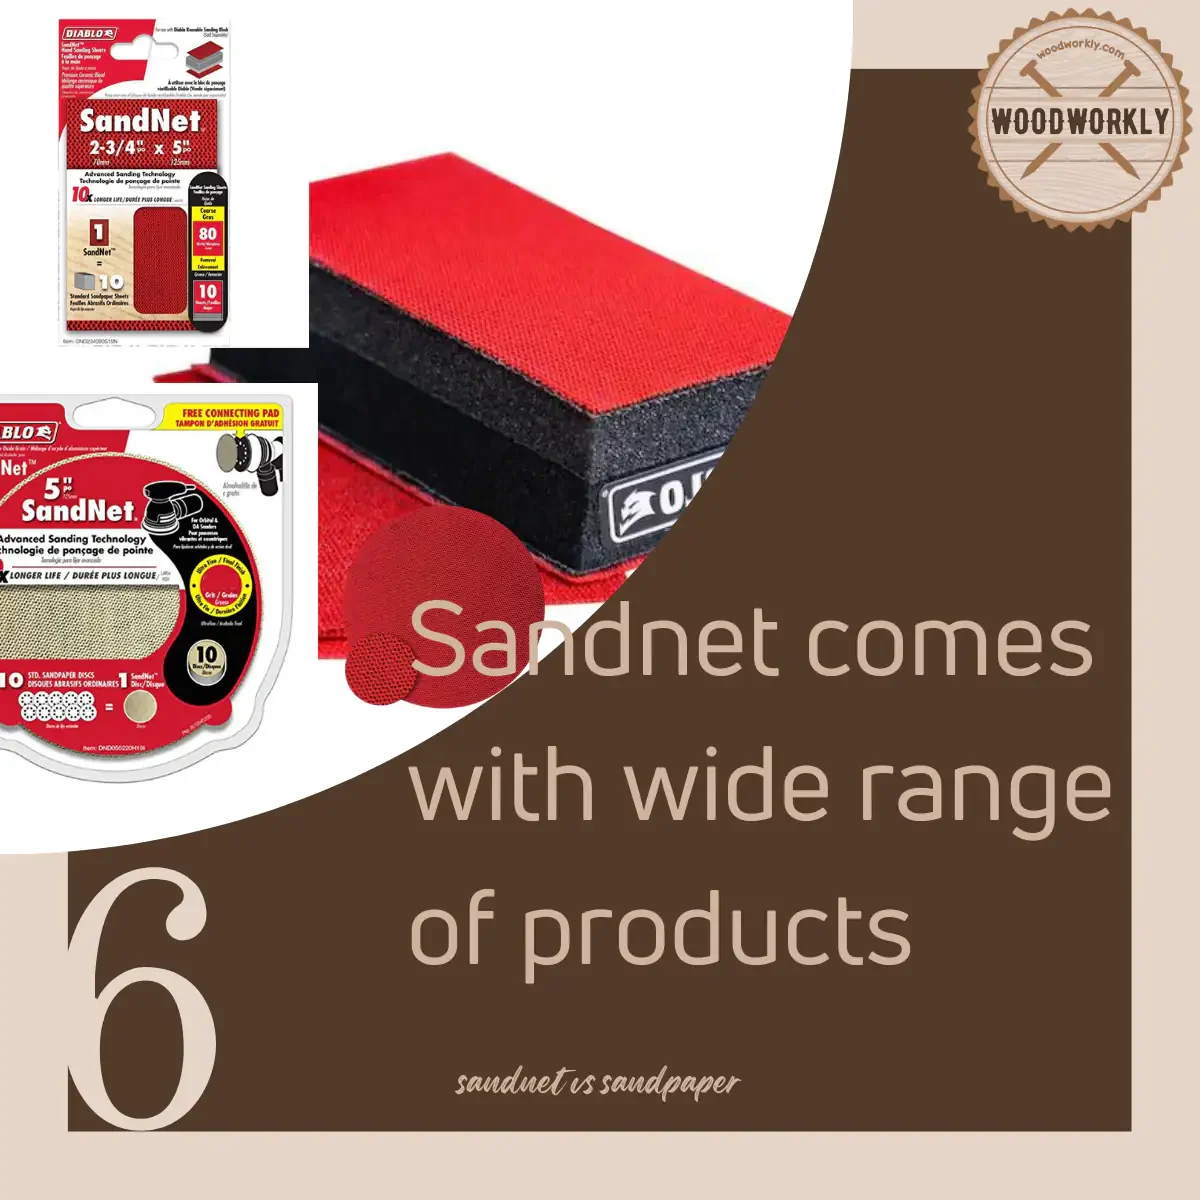 Sandnet comes with a wide range of products